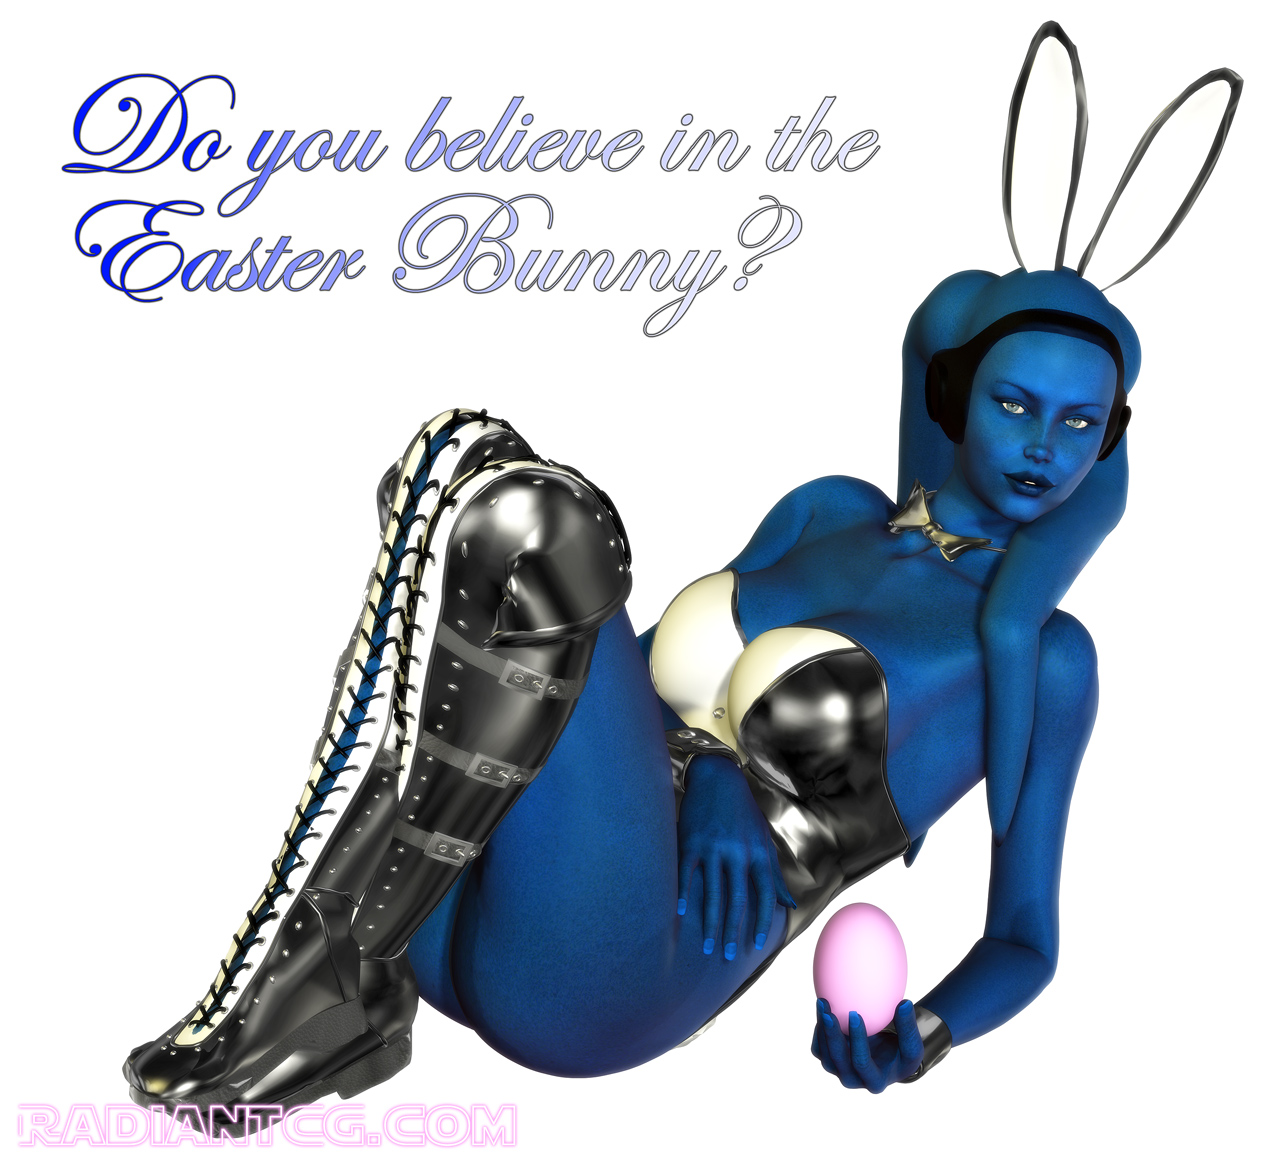 Do You Believe in the Easter Bunny?